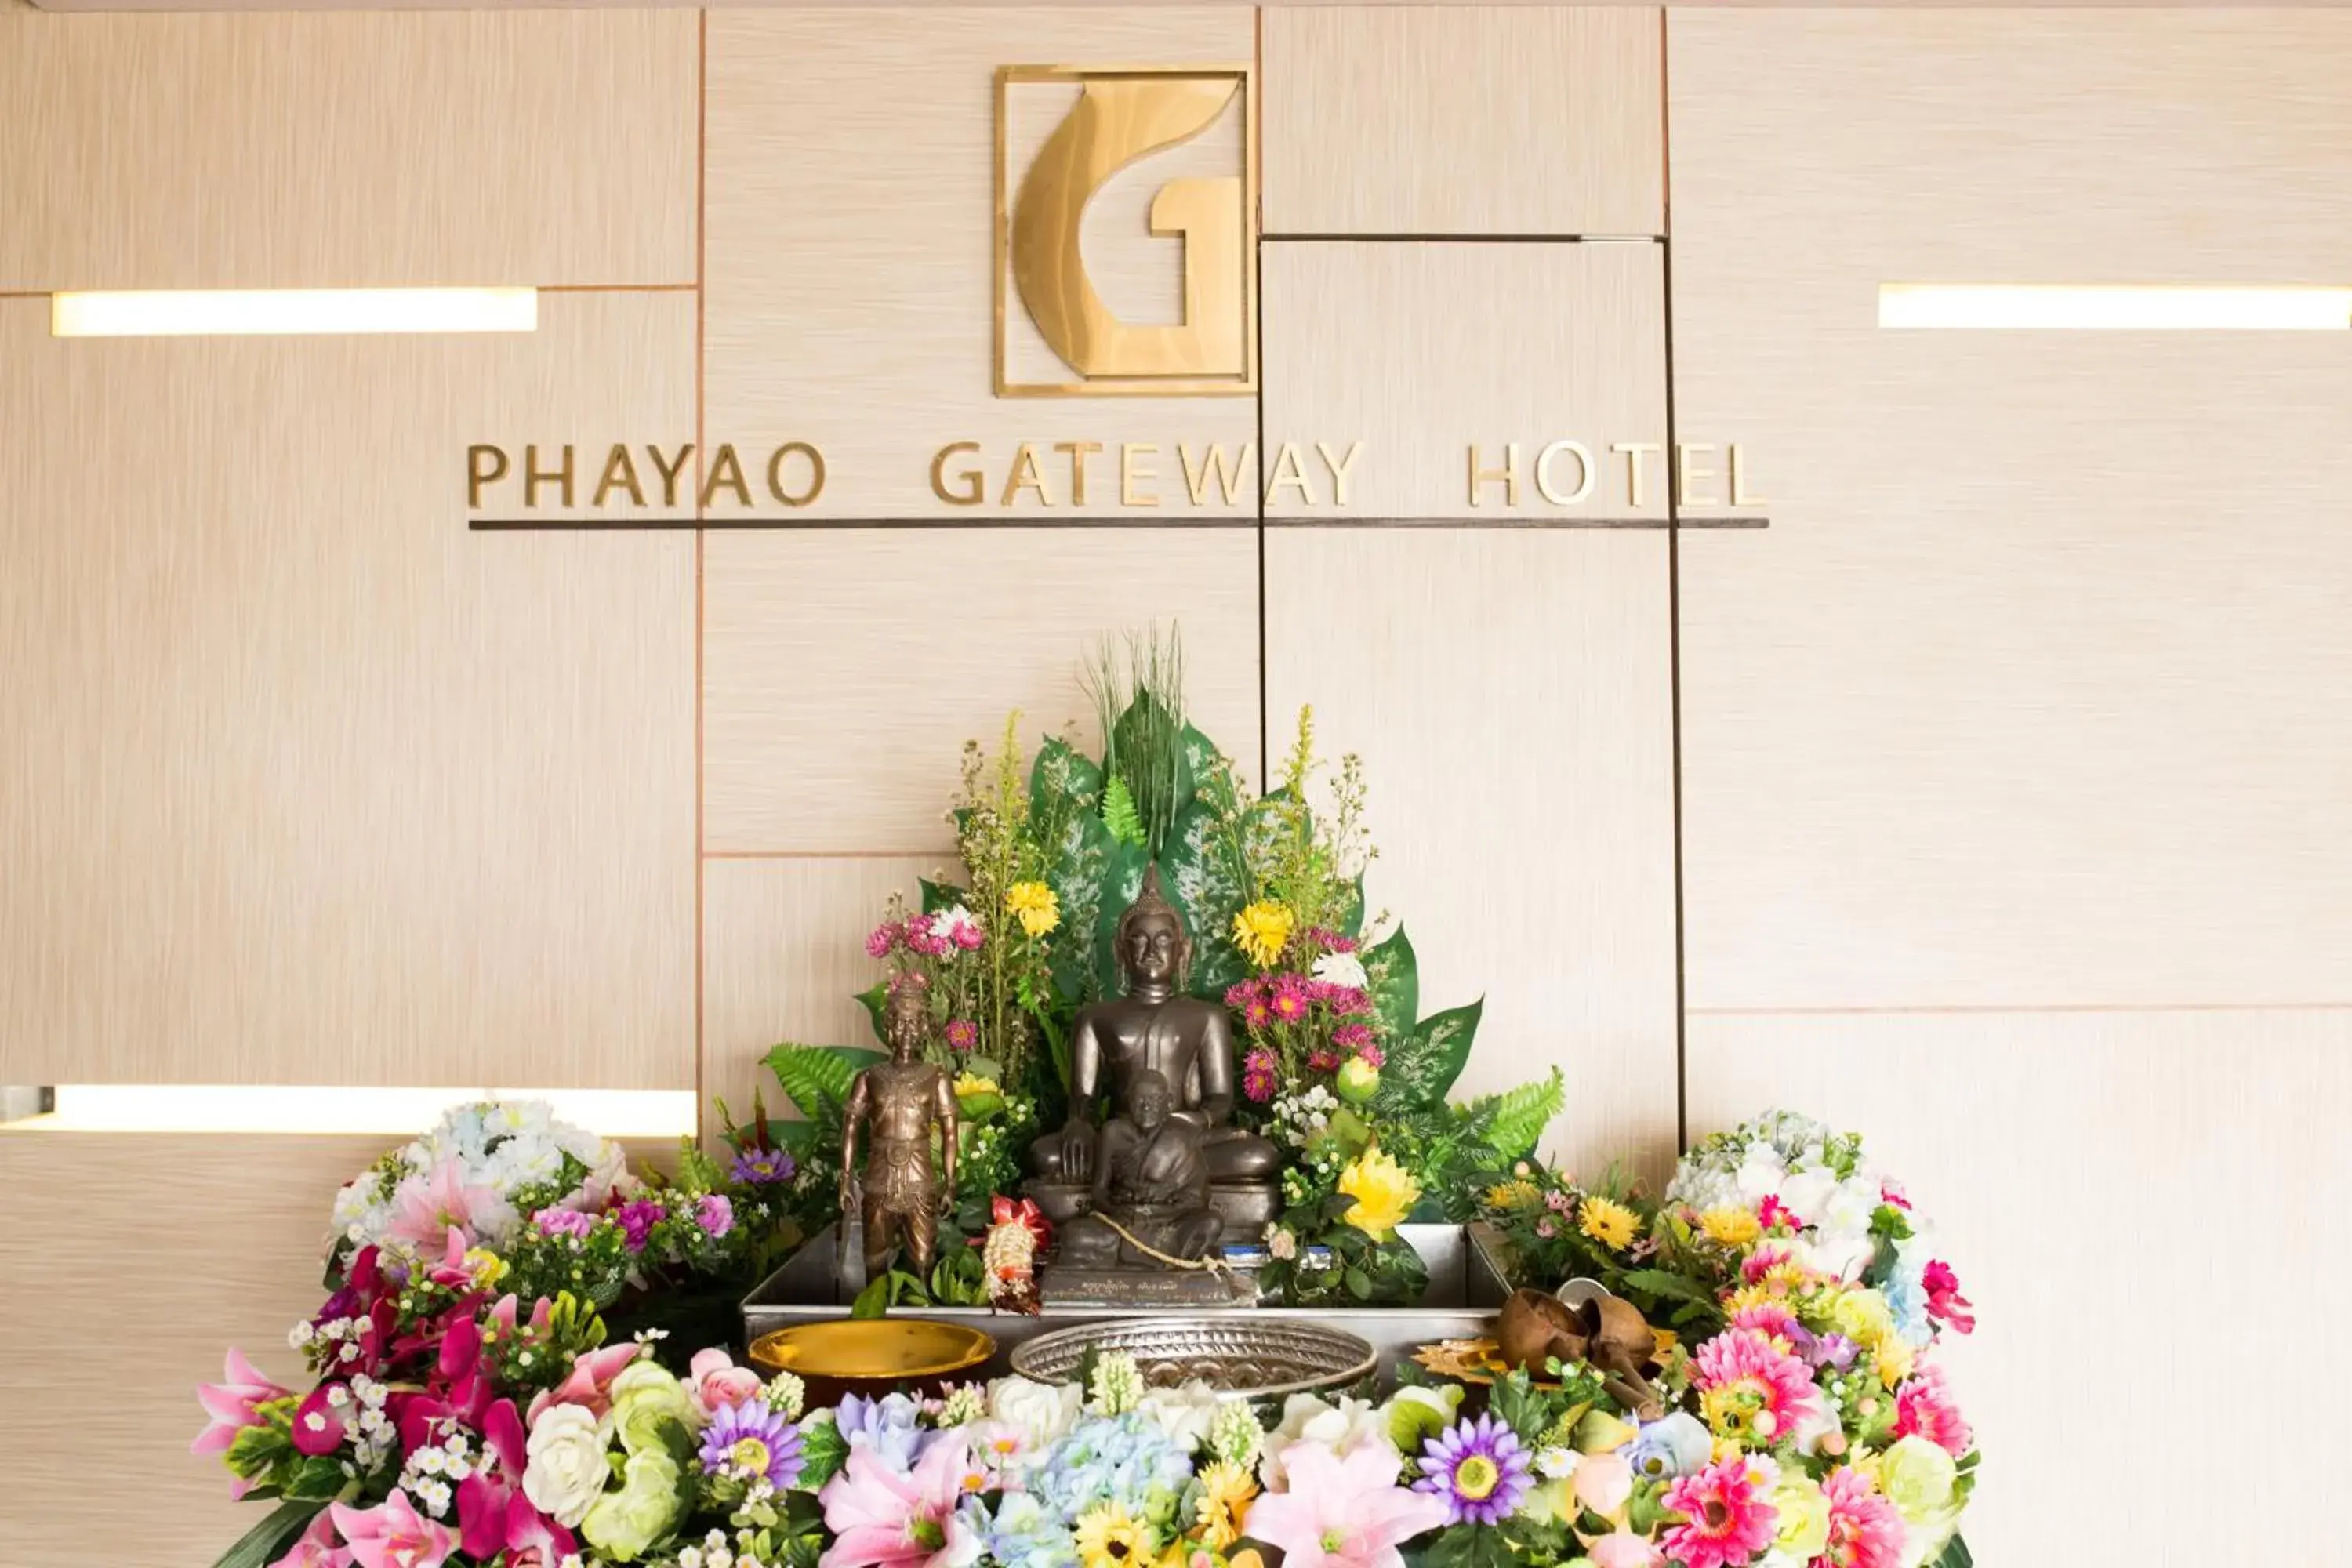 Property logo or sign in Phayao Gateway Hotel